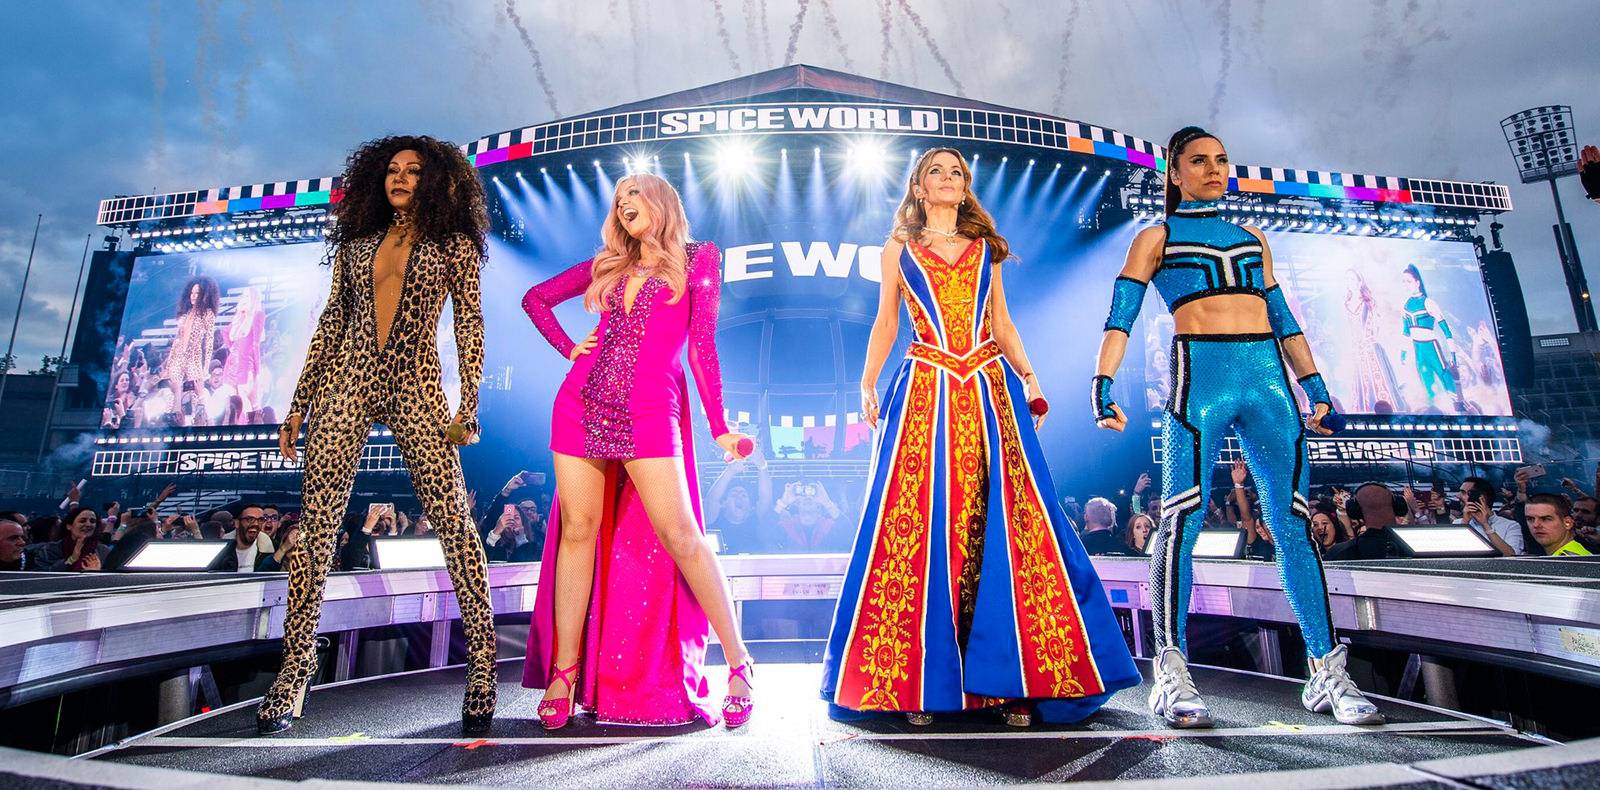 Why fans were disappointed by the return of the Spice Girls